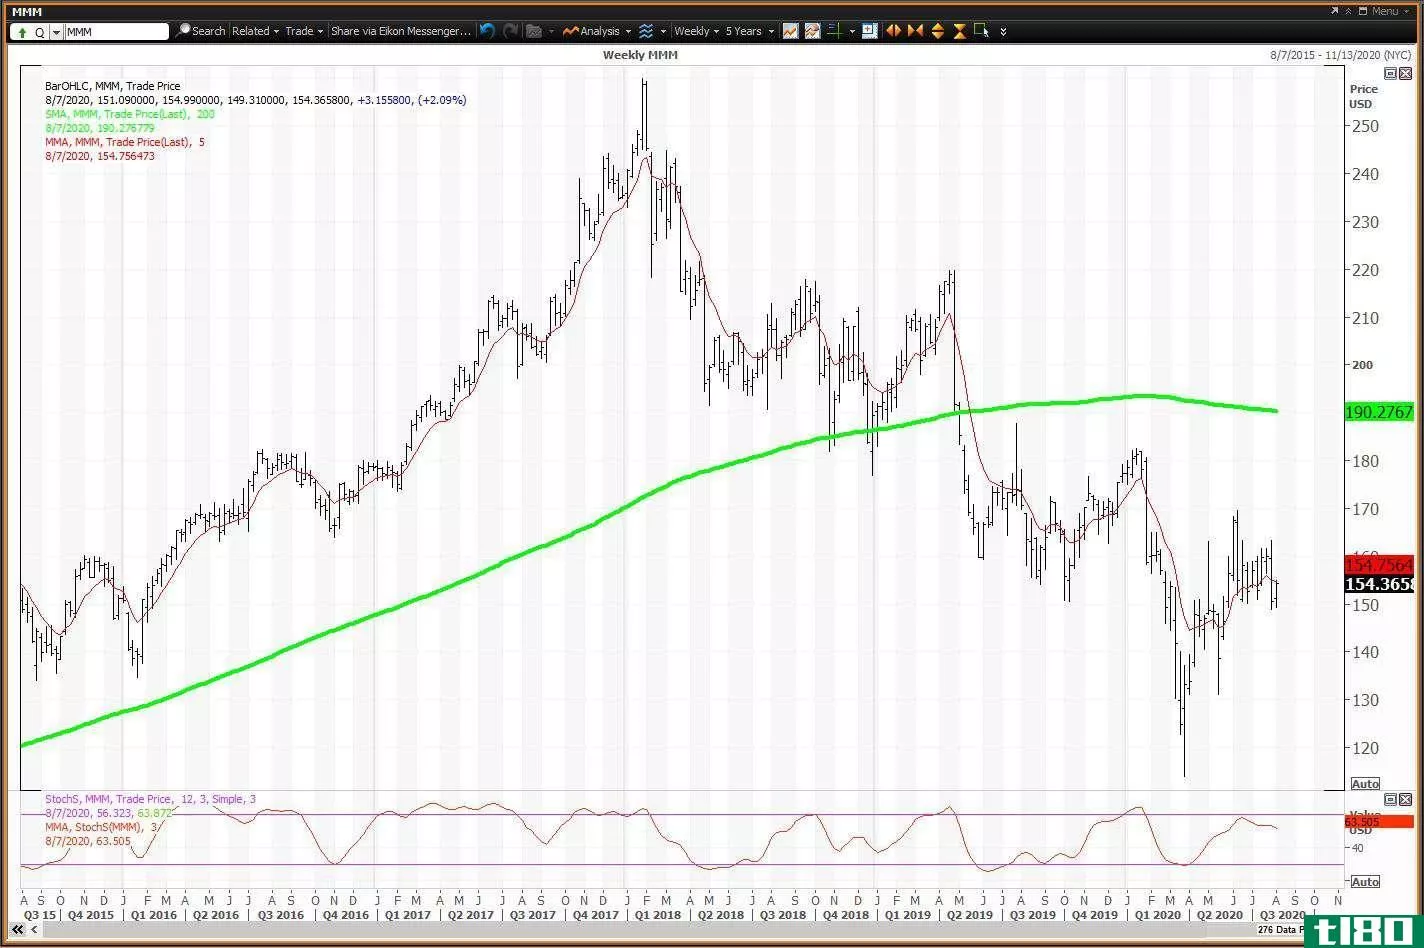 Weekly chart showing the share price performance of 3M Company (MMM)